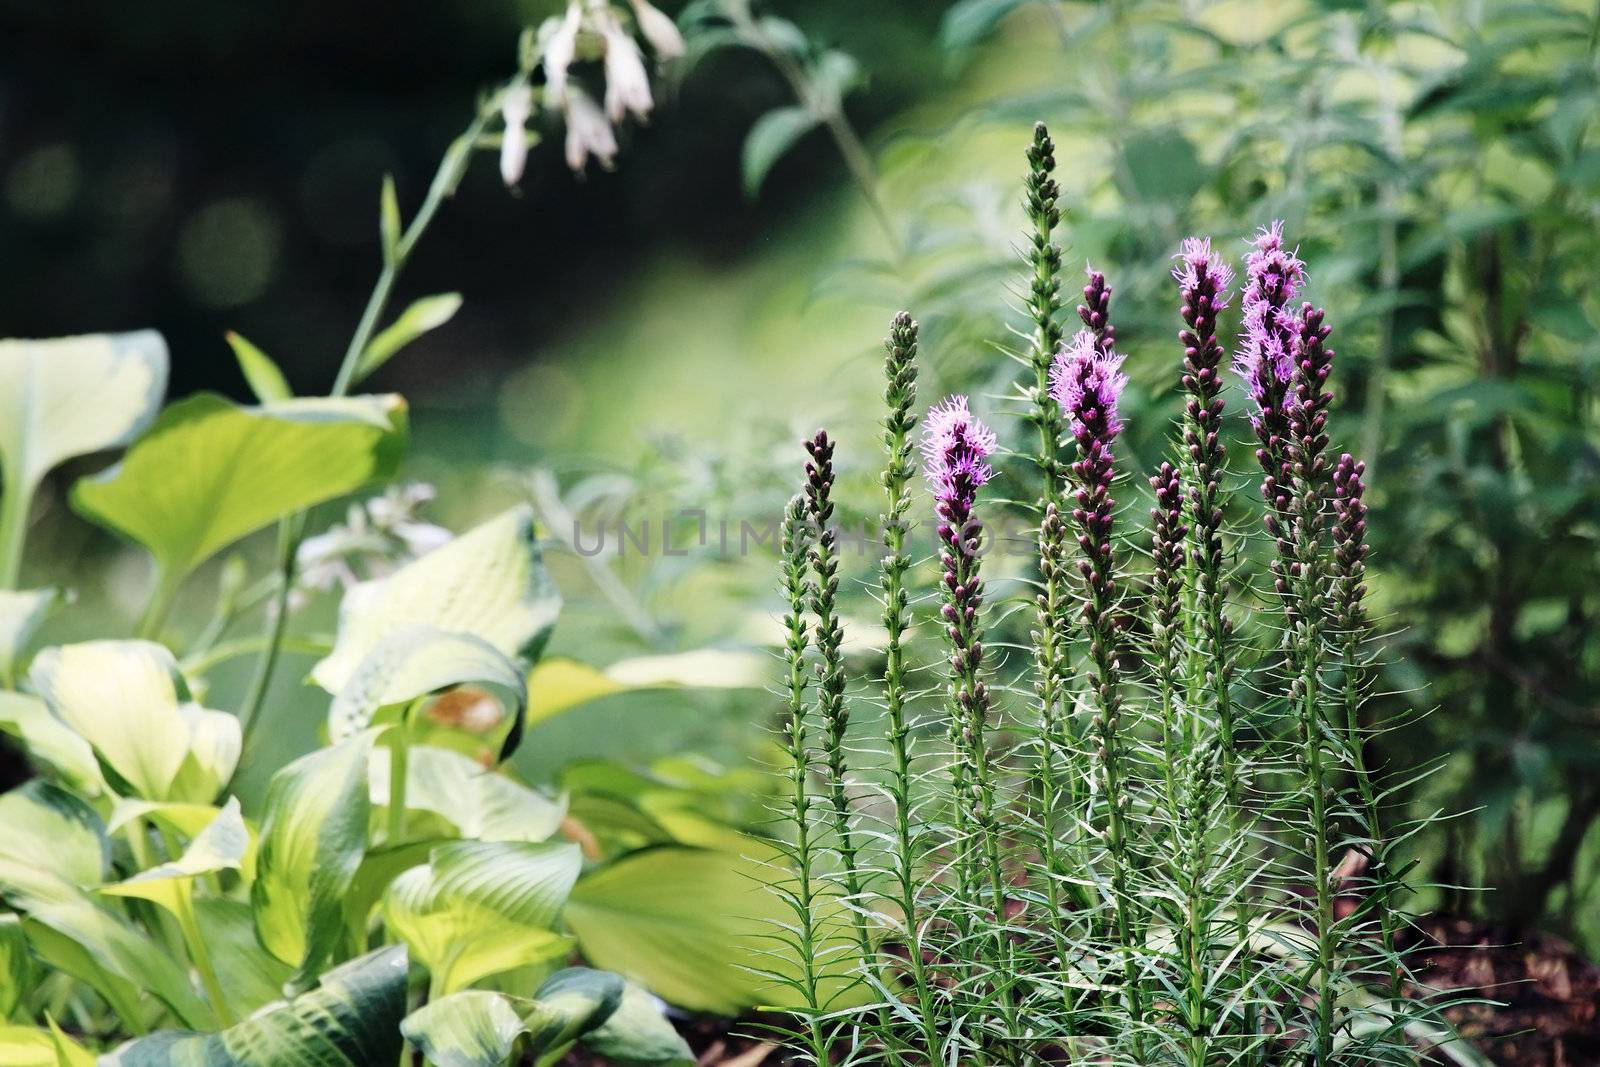 Beautiful garden in the morning light with Blazing Star (Liatris) flowers and hostas in the background. 